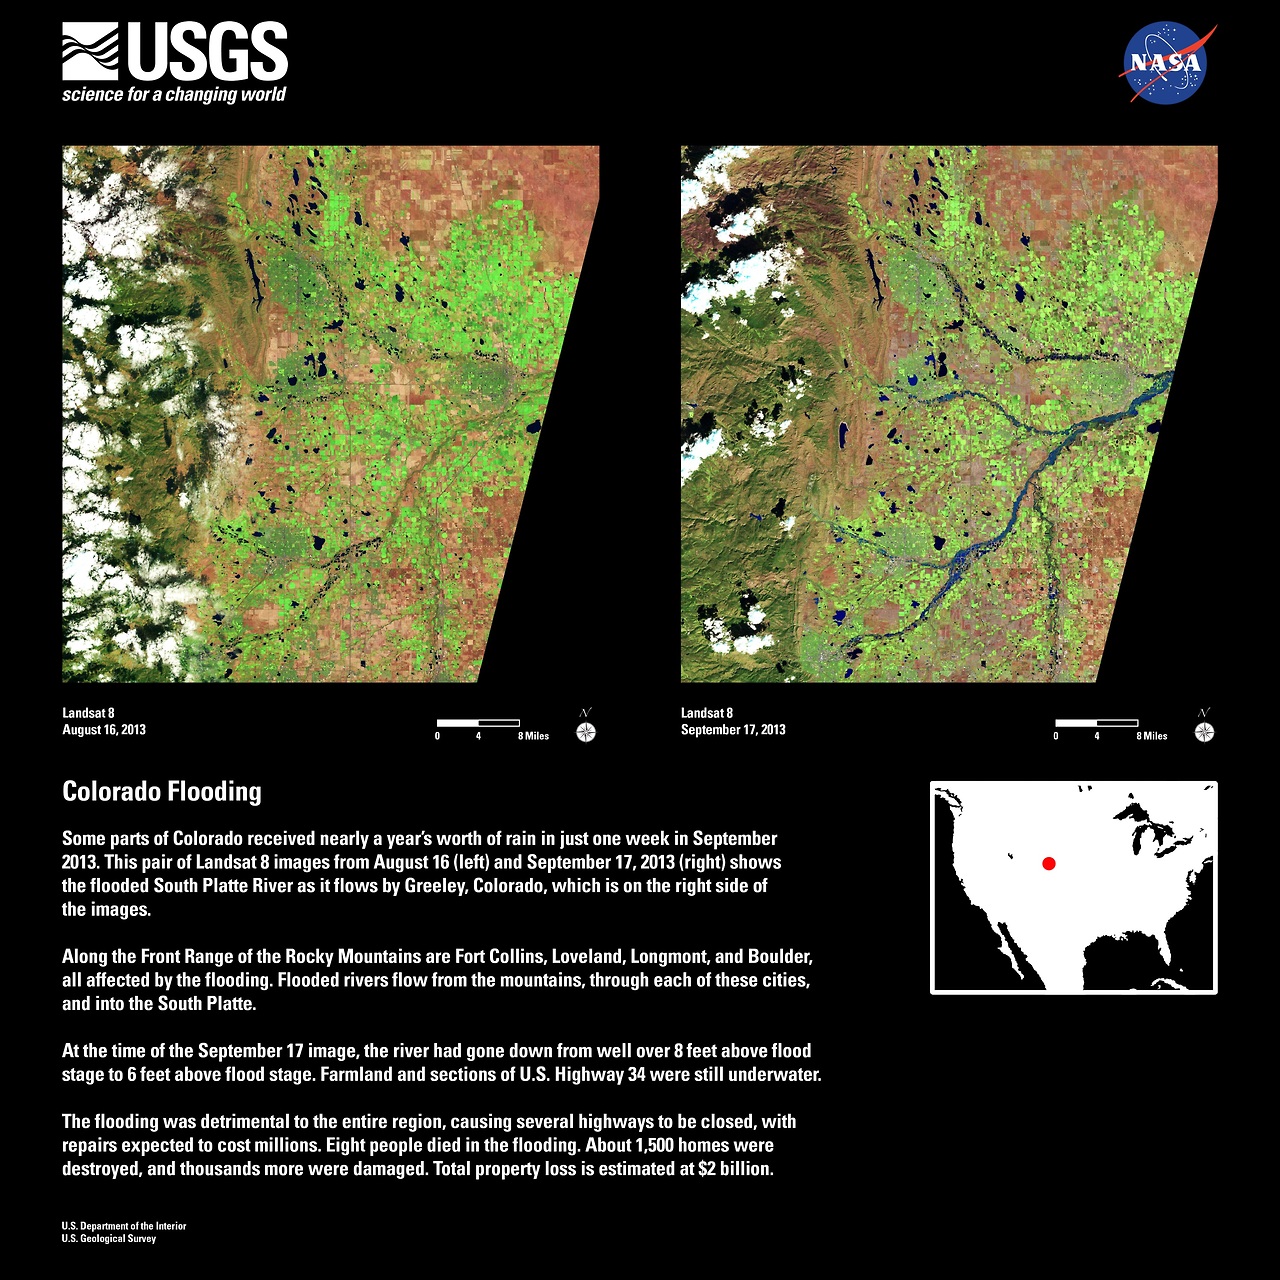 Image description: Some parts of Colorado received nearly a year’s worth of rain in just one week in September 2013. This pair of Landsat 8 images from August 16 (left) and September 17, 2013 (right) shows the flooded South Platte River as it flows by Greeley, Colorado, which is on the right side of the images.
Along the Front Range of the Rocky Mountains are Fort Collins, Loveland, Longmont, and Boulder, all affected by the flooding. Flooded rivers flow from the mountains, through each of these cities, and into the South Platte.
At the time of the September 17 image, the river had gone down from well over 8 feet above flood stage to 6 feet above flood stage. Farmland and sections of U.S. Highway 34 were still underwater.
The flooding was detrimental to the entire region, causing several highways to be closed, with repairs expected to cost millions. Eight people died in the flooding. About 1,500 homes were destroyed, and thousands more were damaged. Total property loss is estimated at $2 billion.
Image from the U.S. Geological Survey.